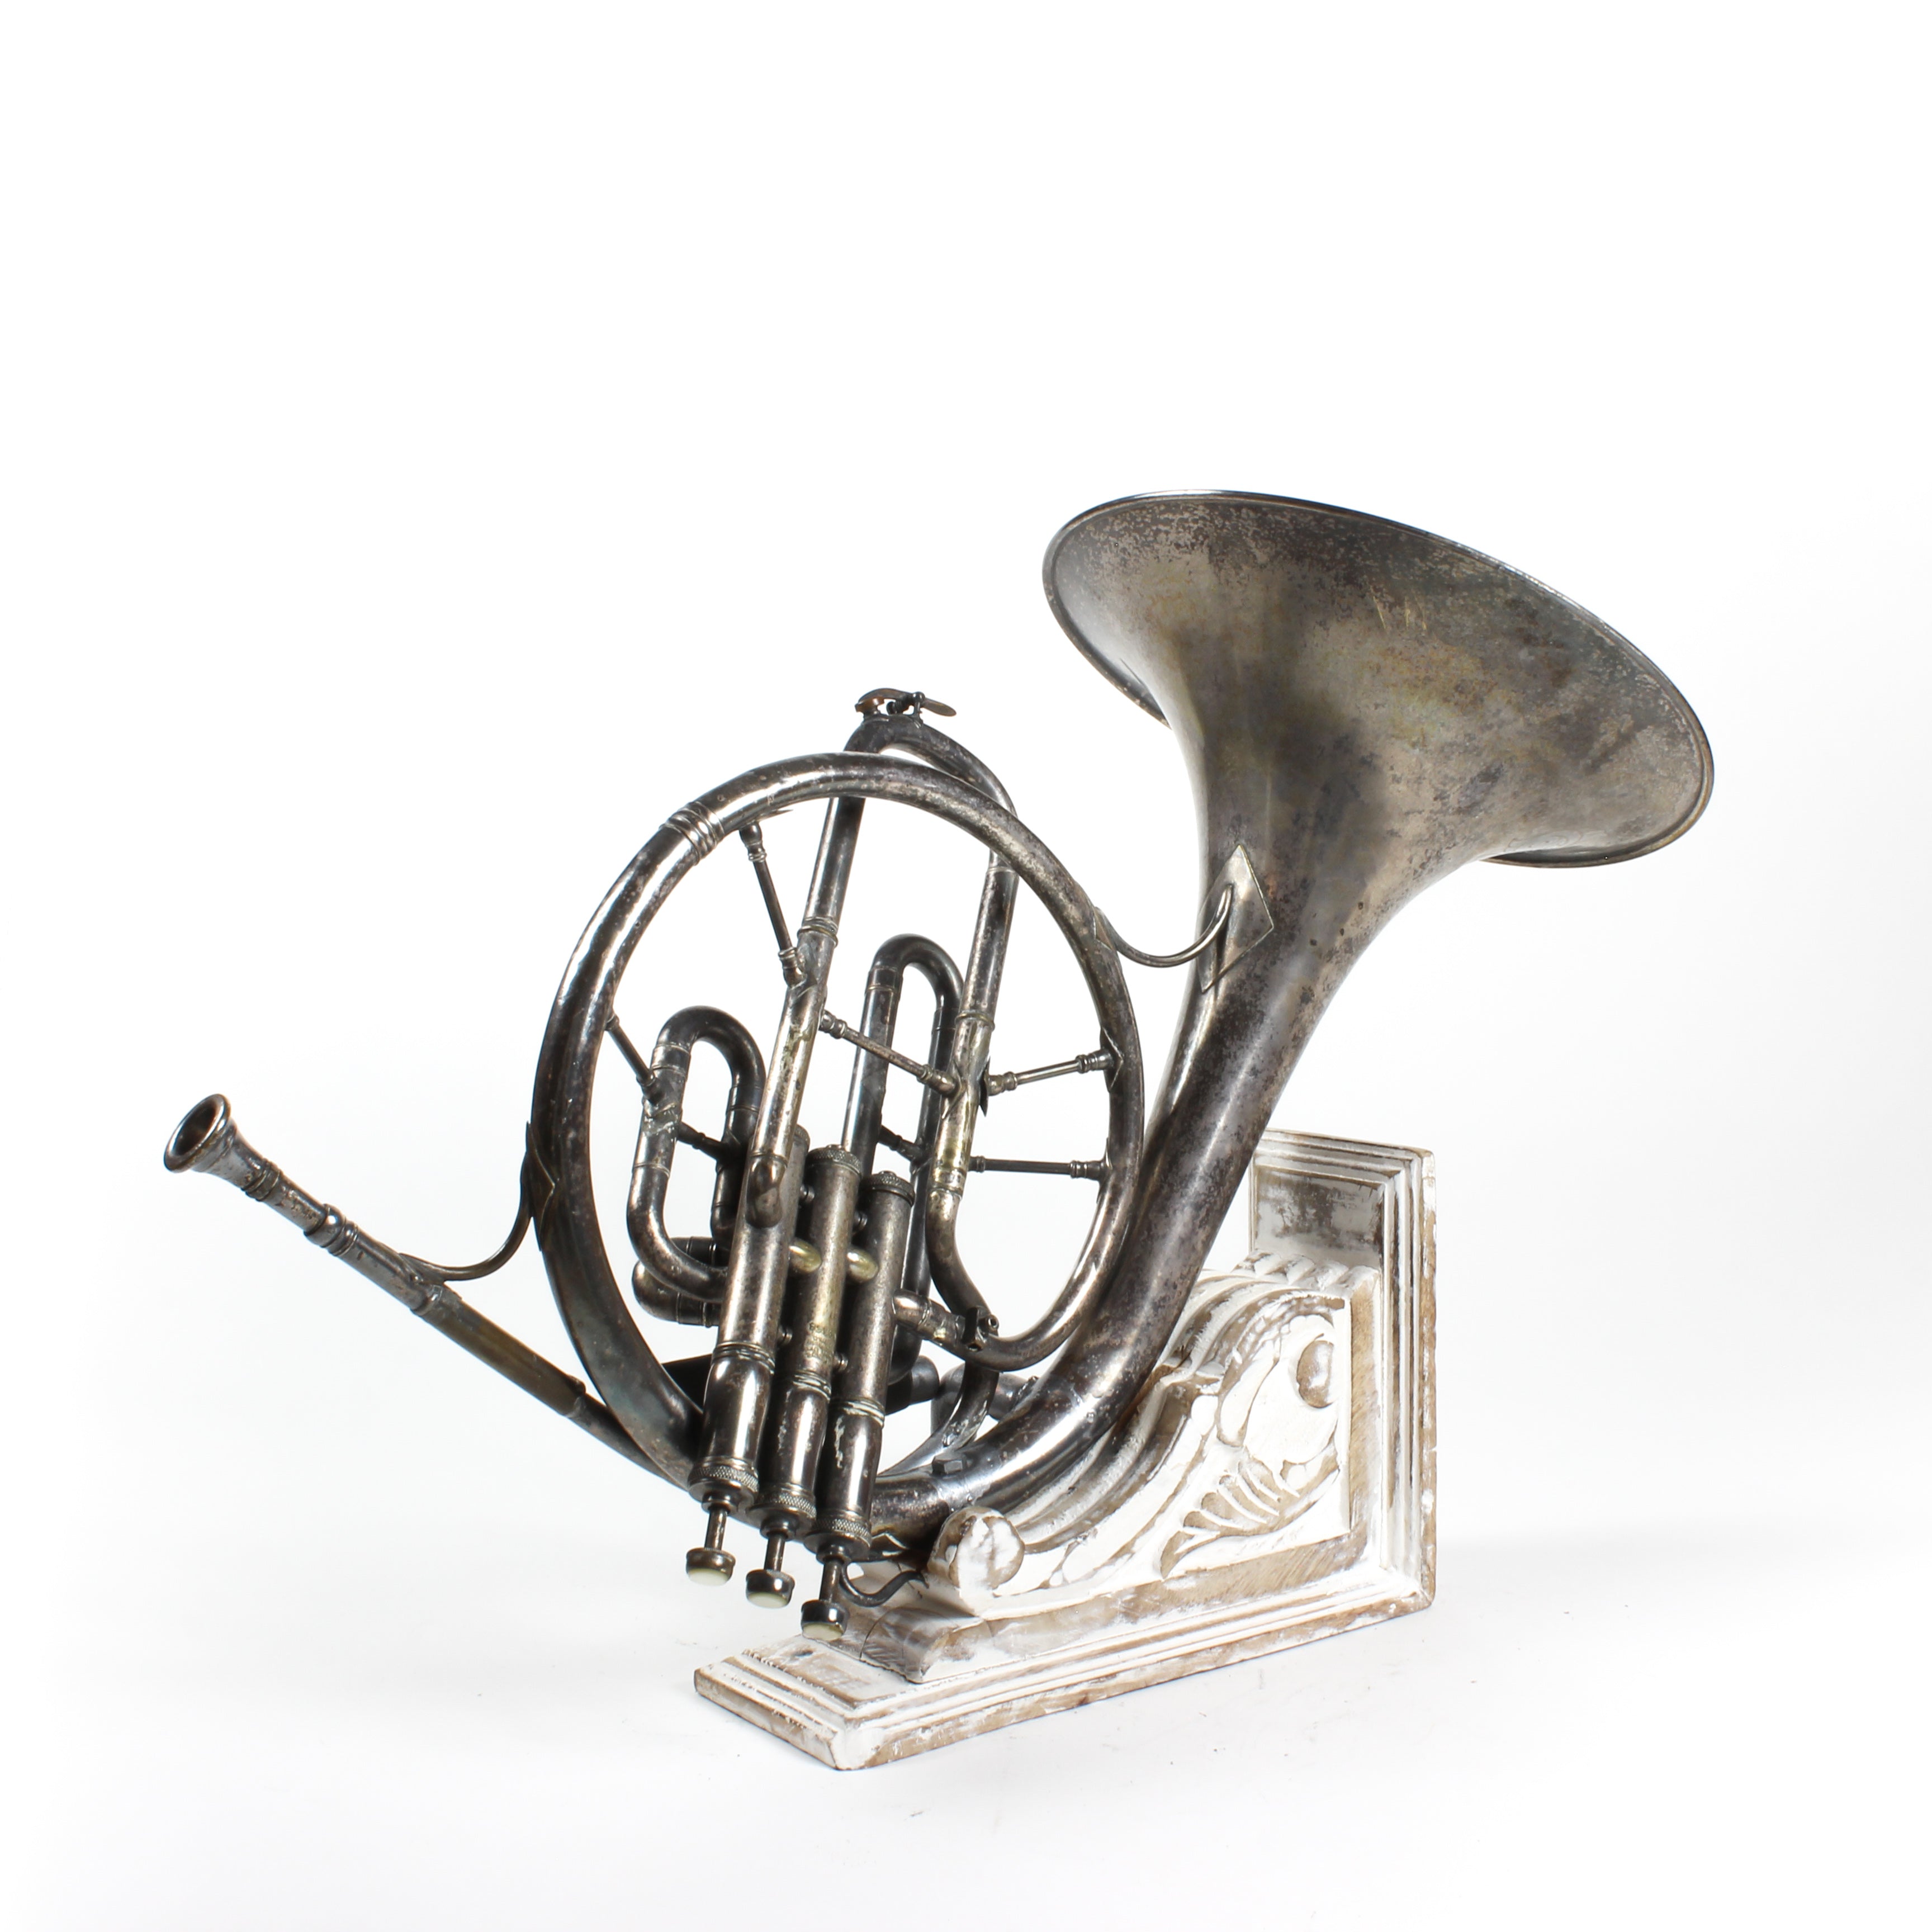 The French Horn